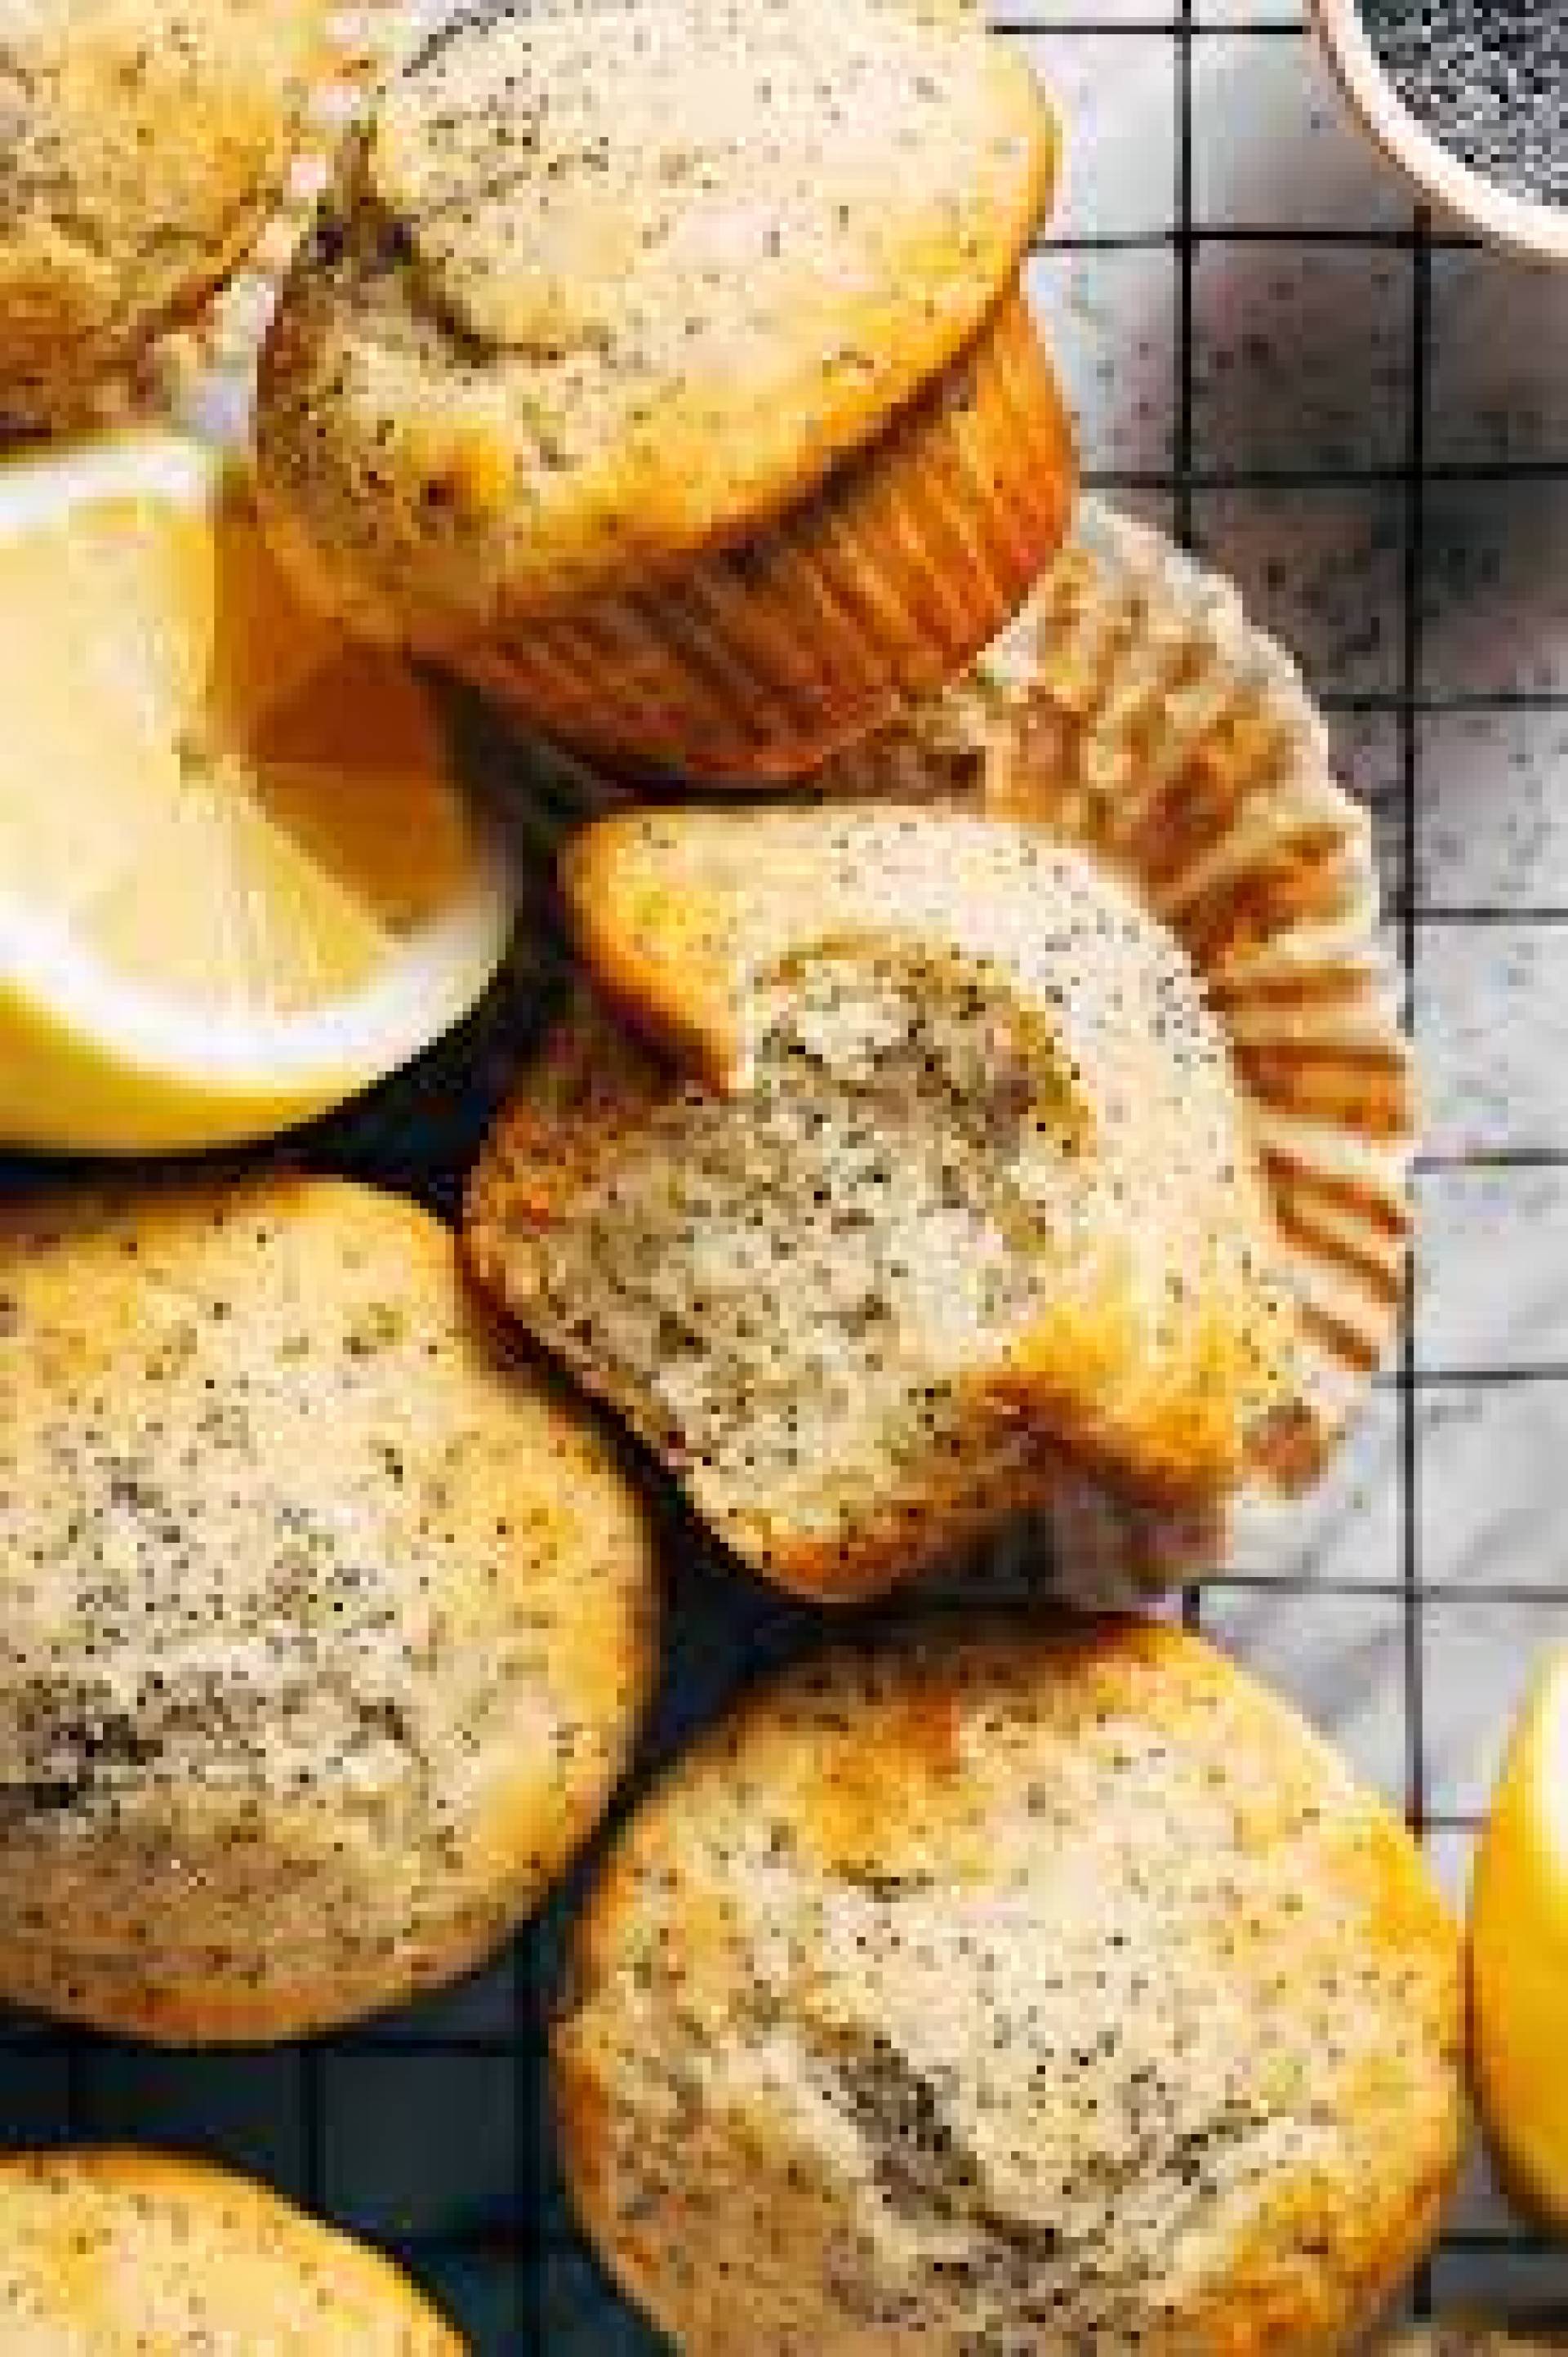 Lemon Poppyseed Muffin with Bacon